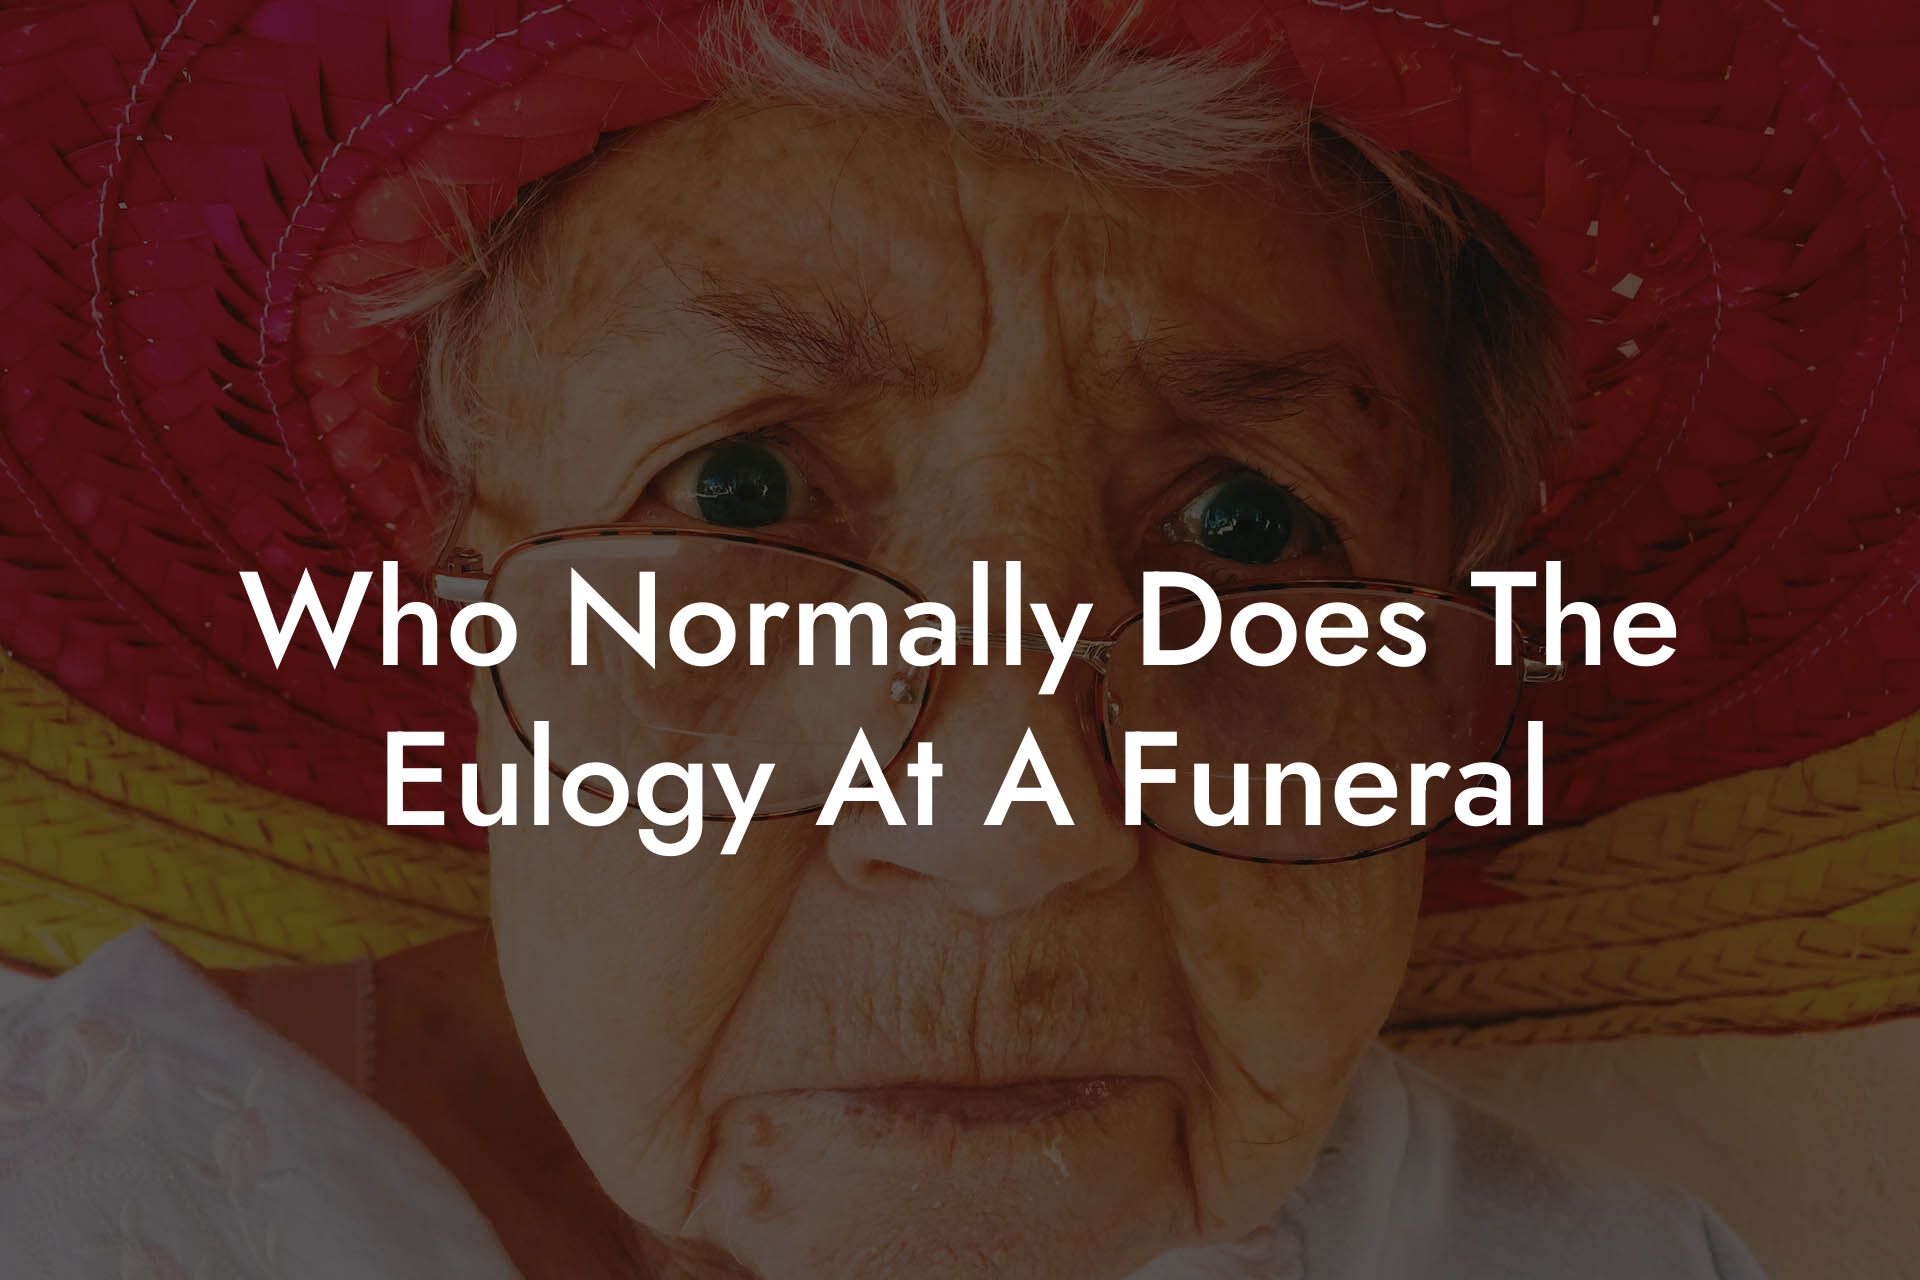 Who Normally Does The Eulogy At A Funeral